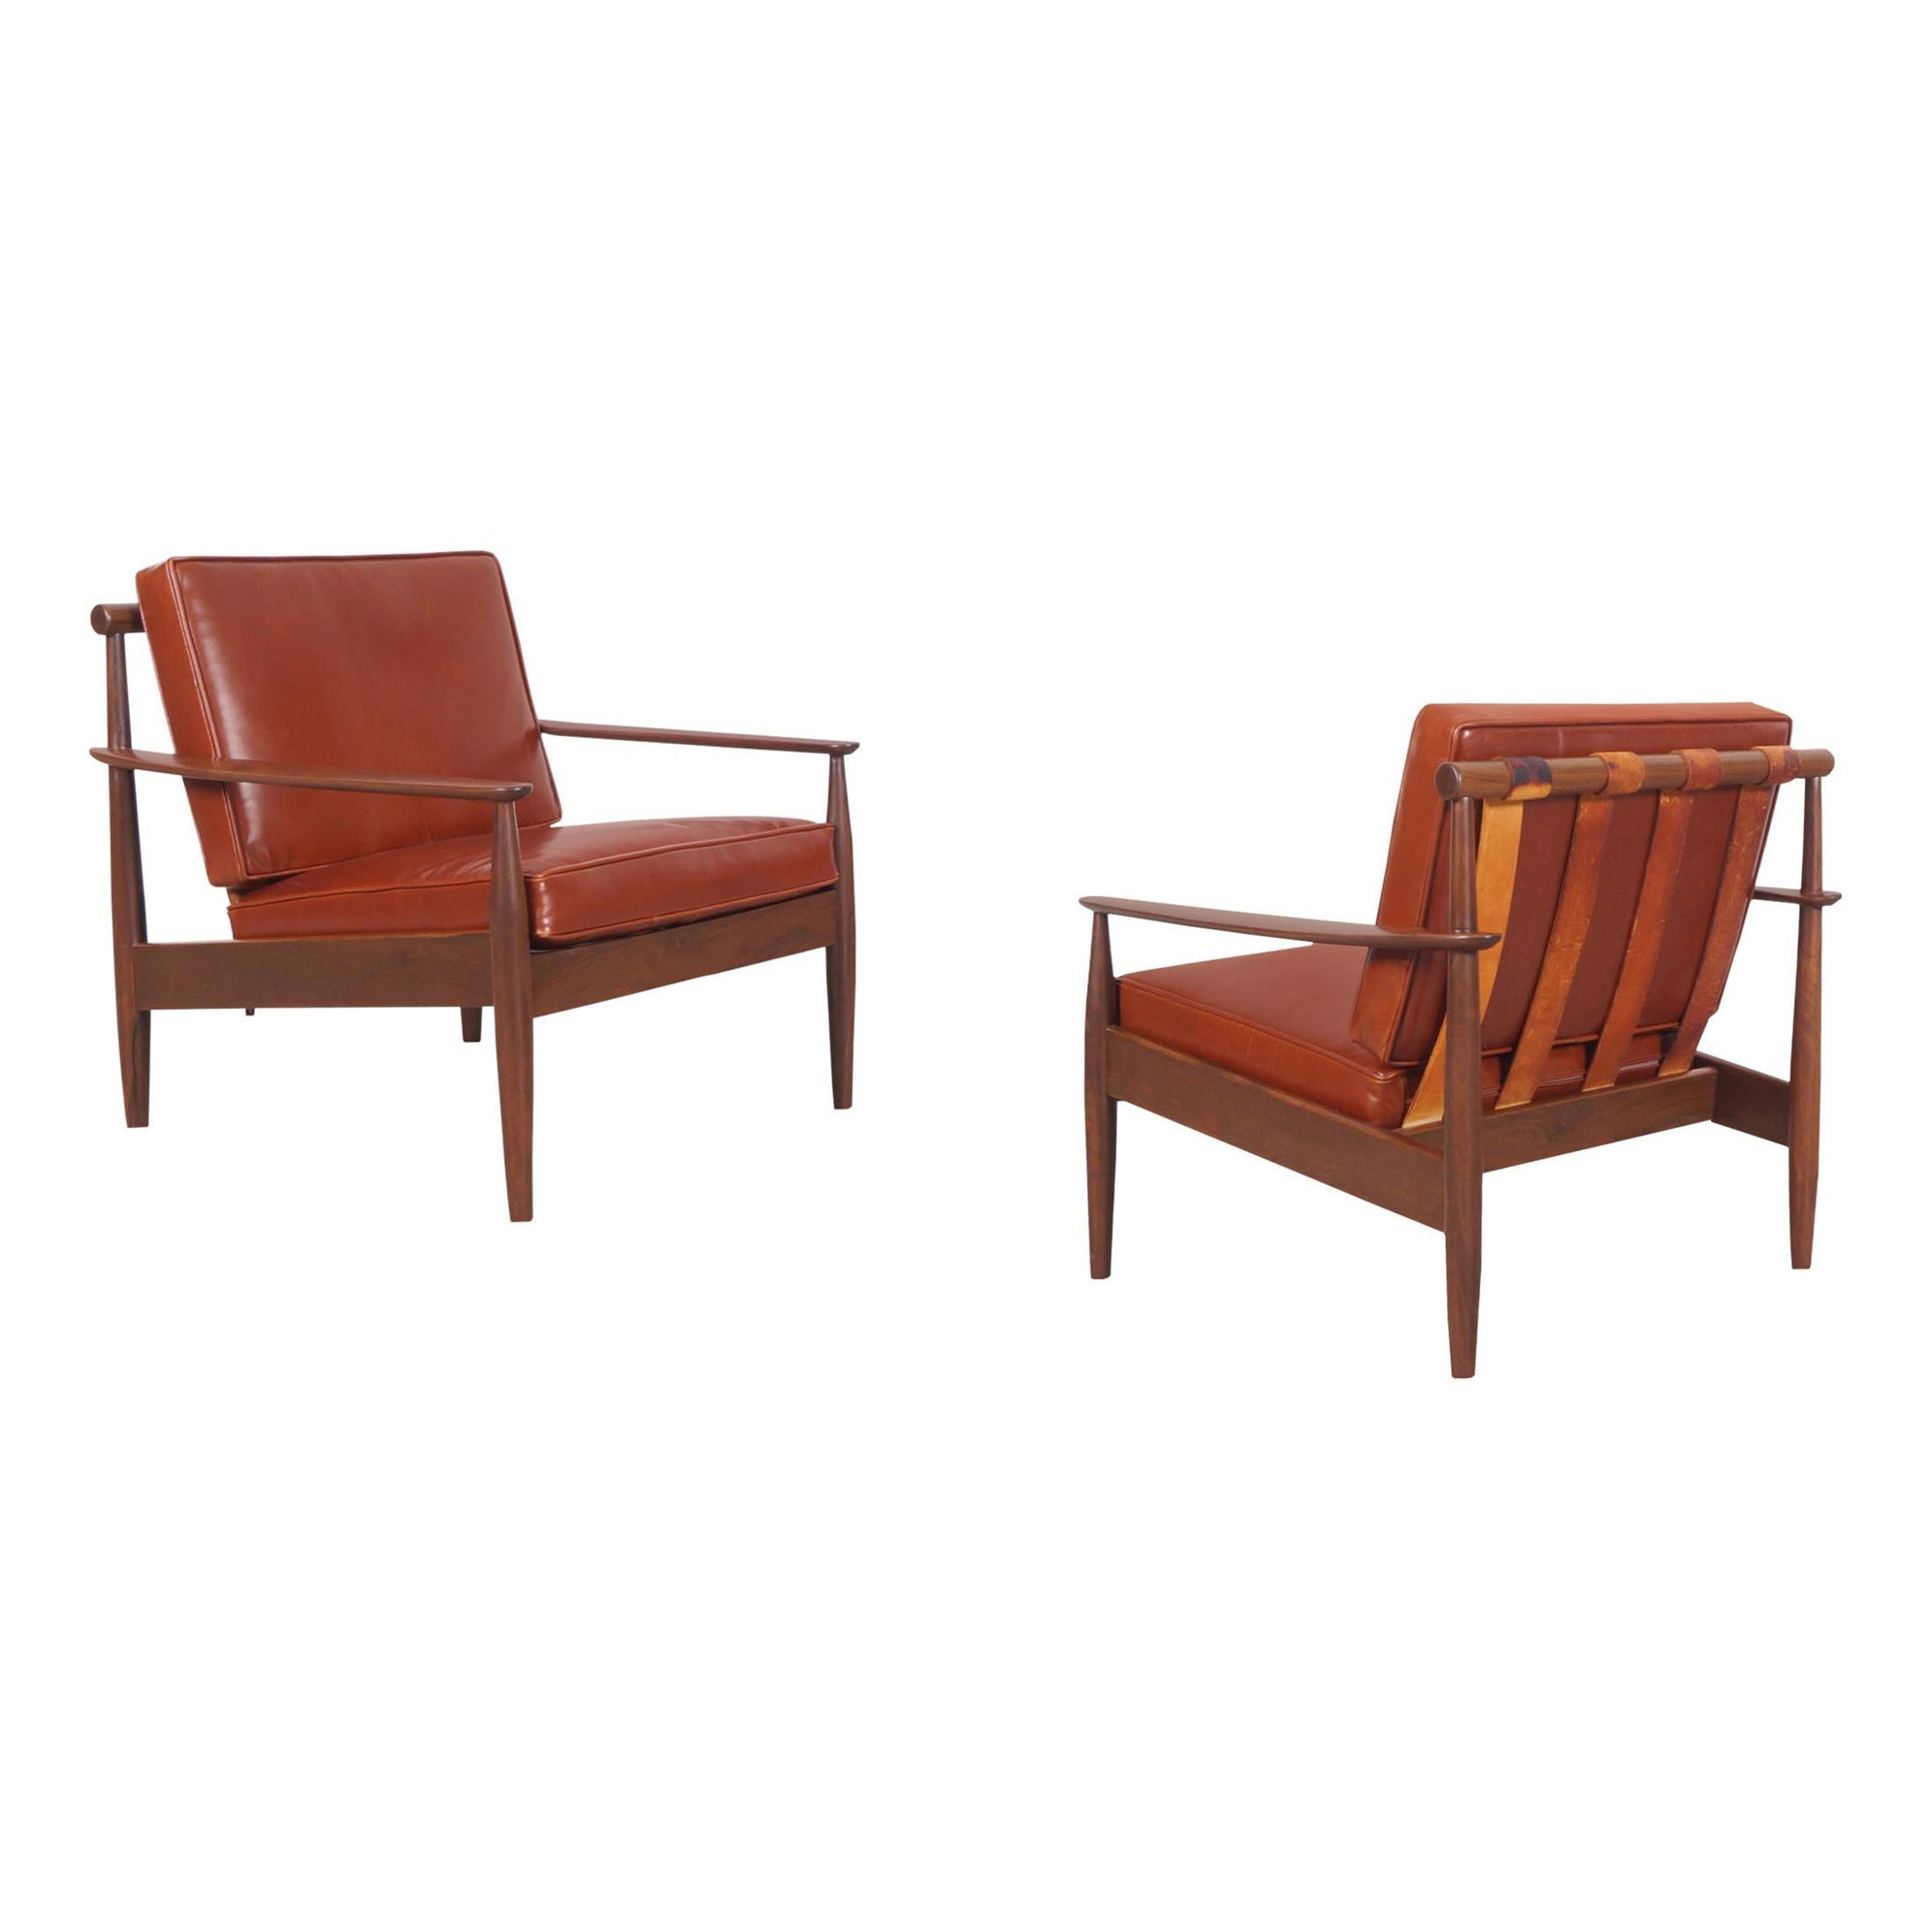 Danish Modern Leather and Walnut Lounge Chairs by Hans C. Andersen